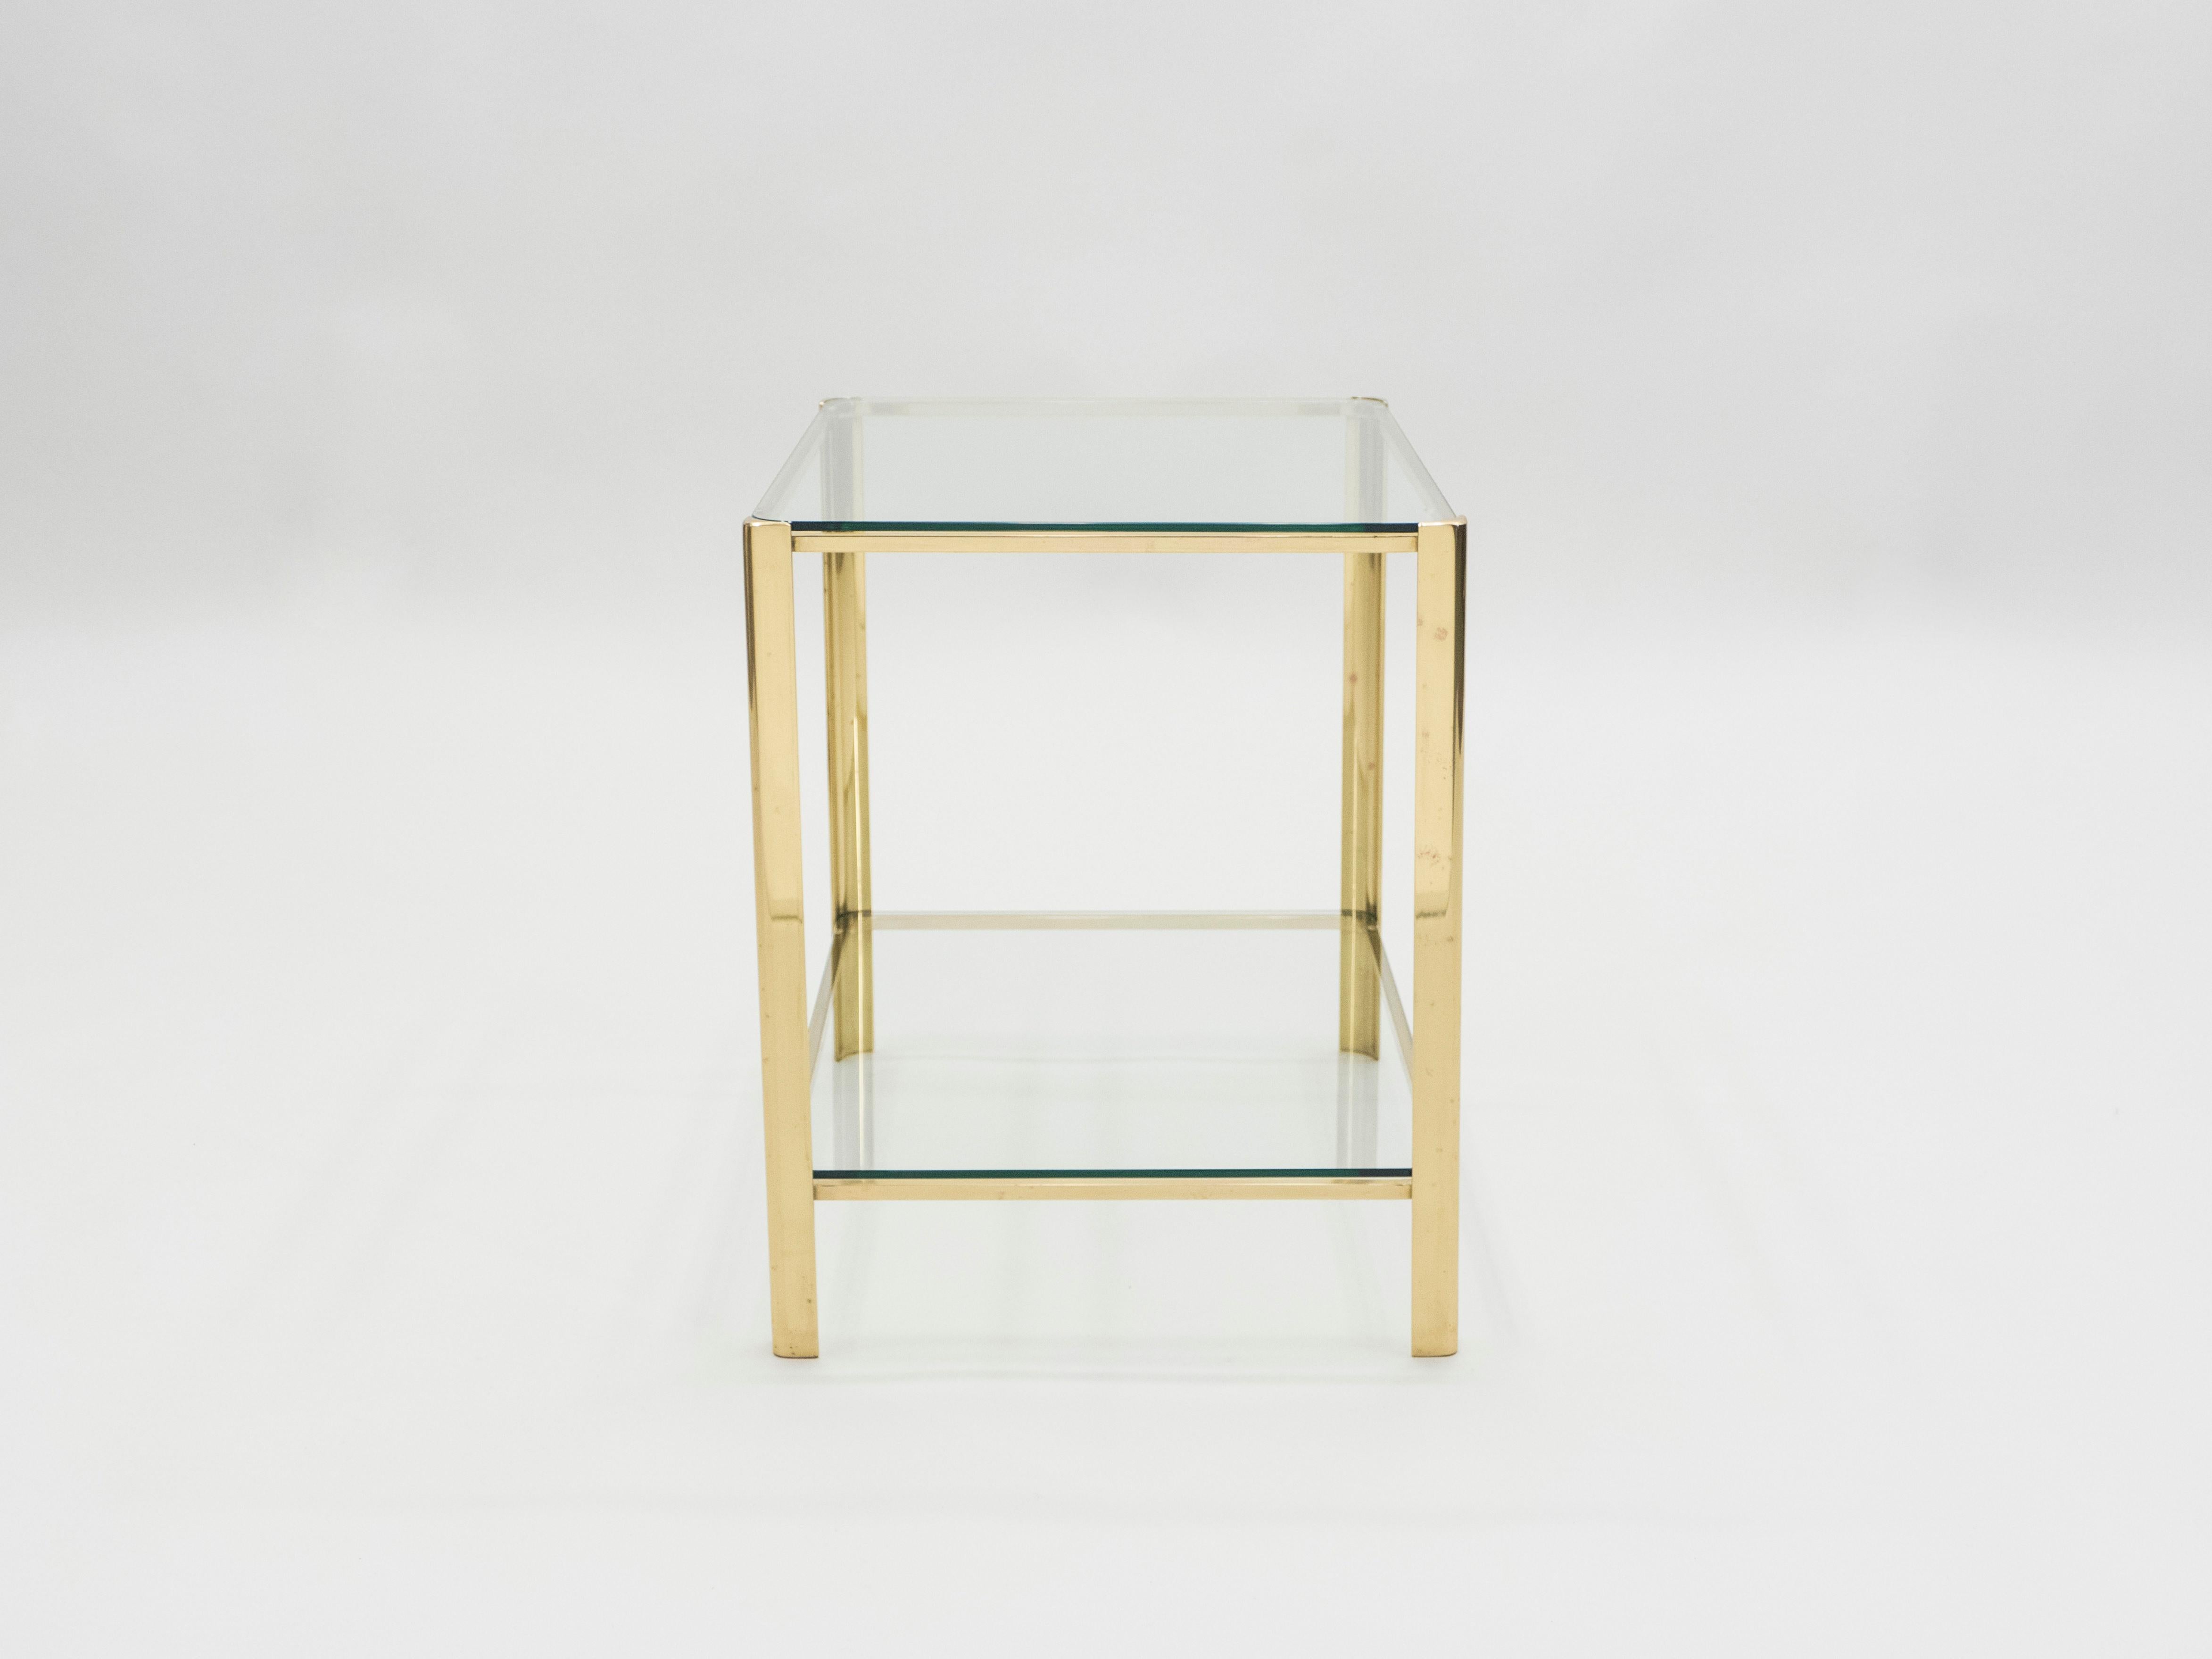 French Bronze occasional side table by Jacques Quinet for Broncz, 1960s For Sale 5